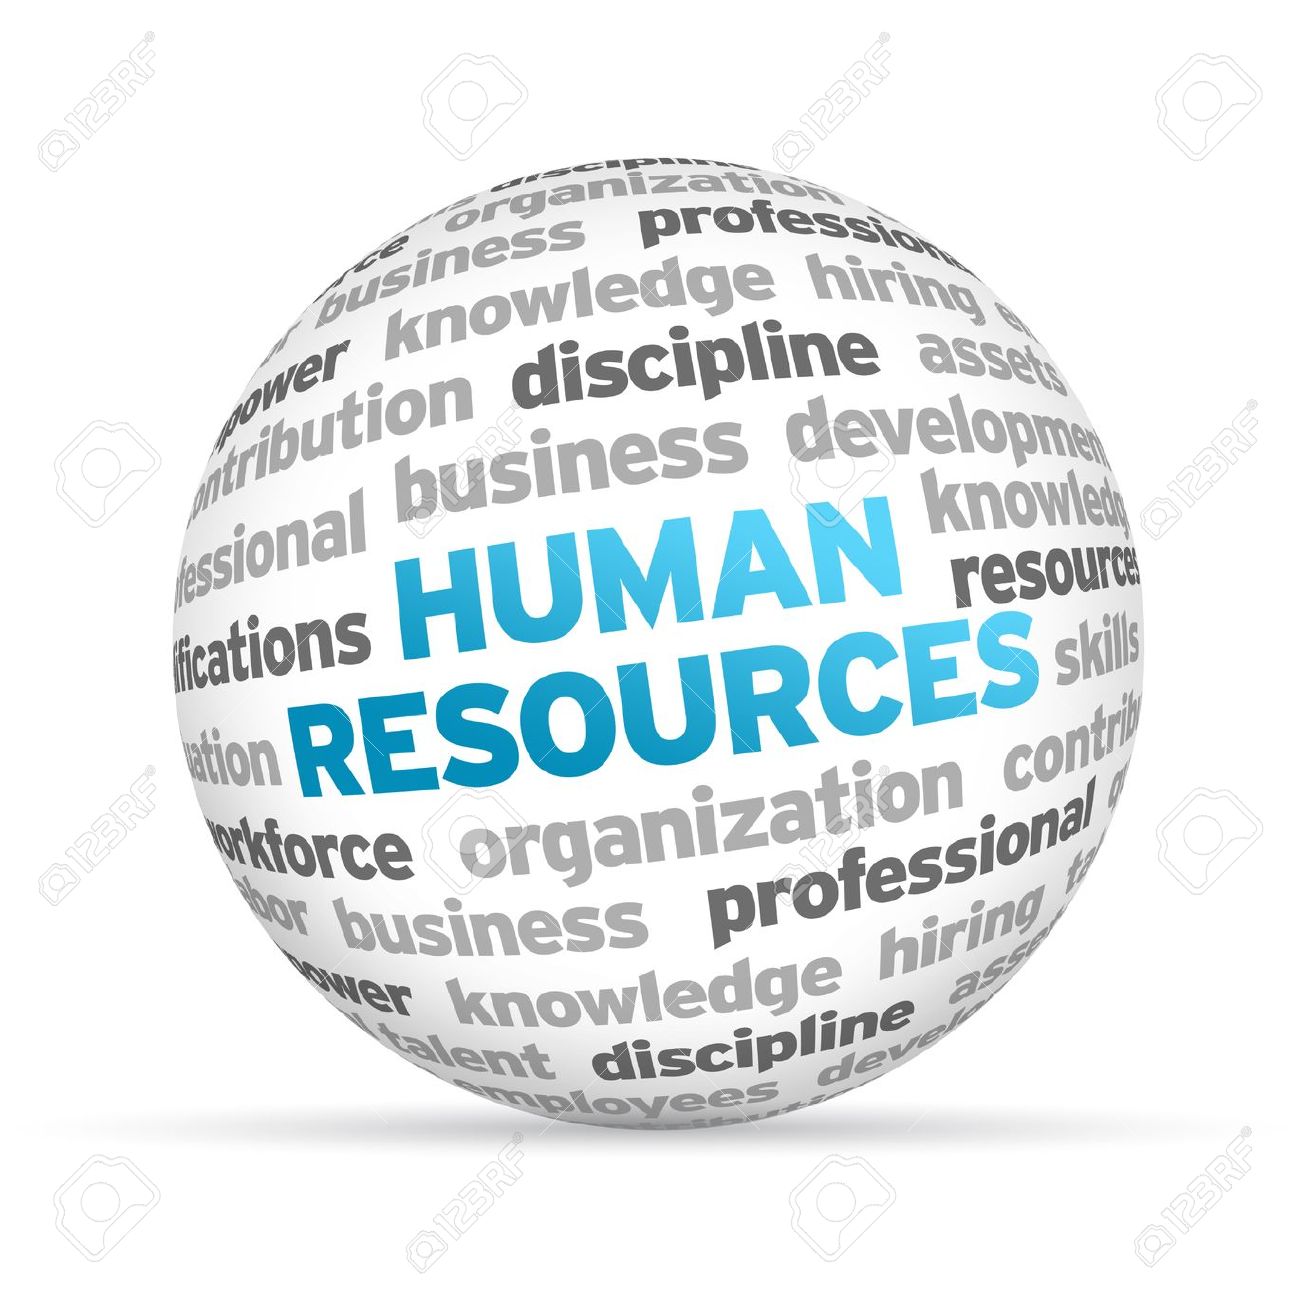 Human Resources Jobs The New 